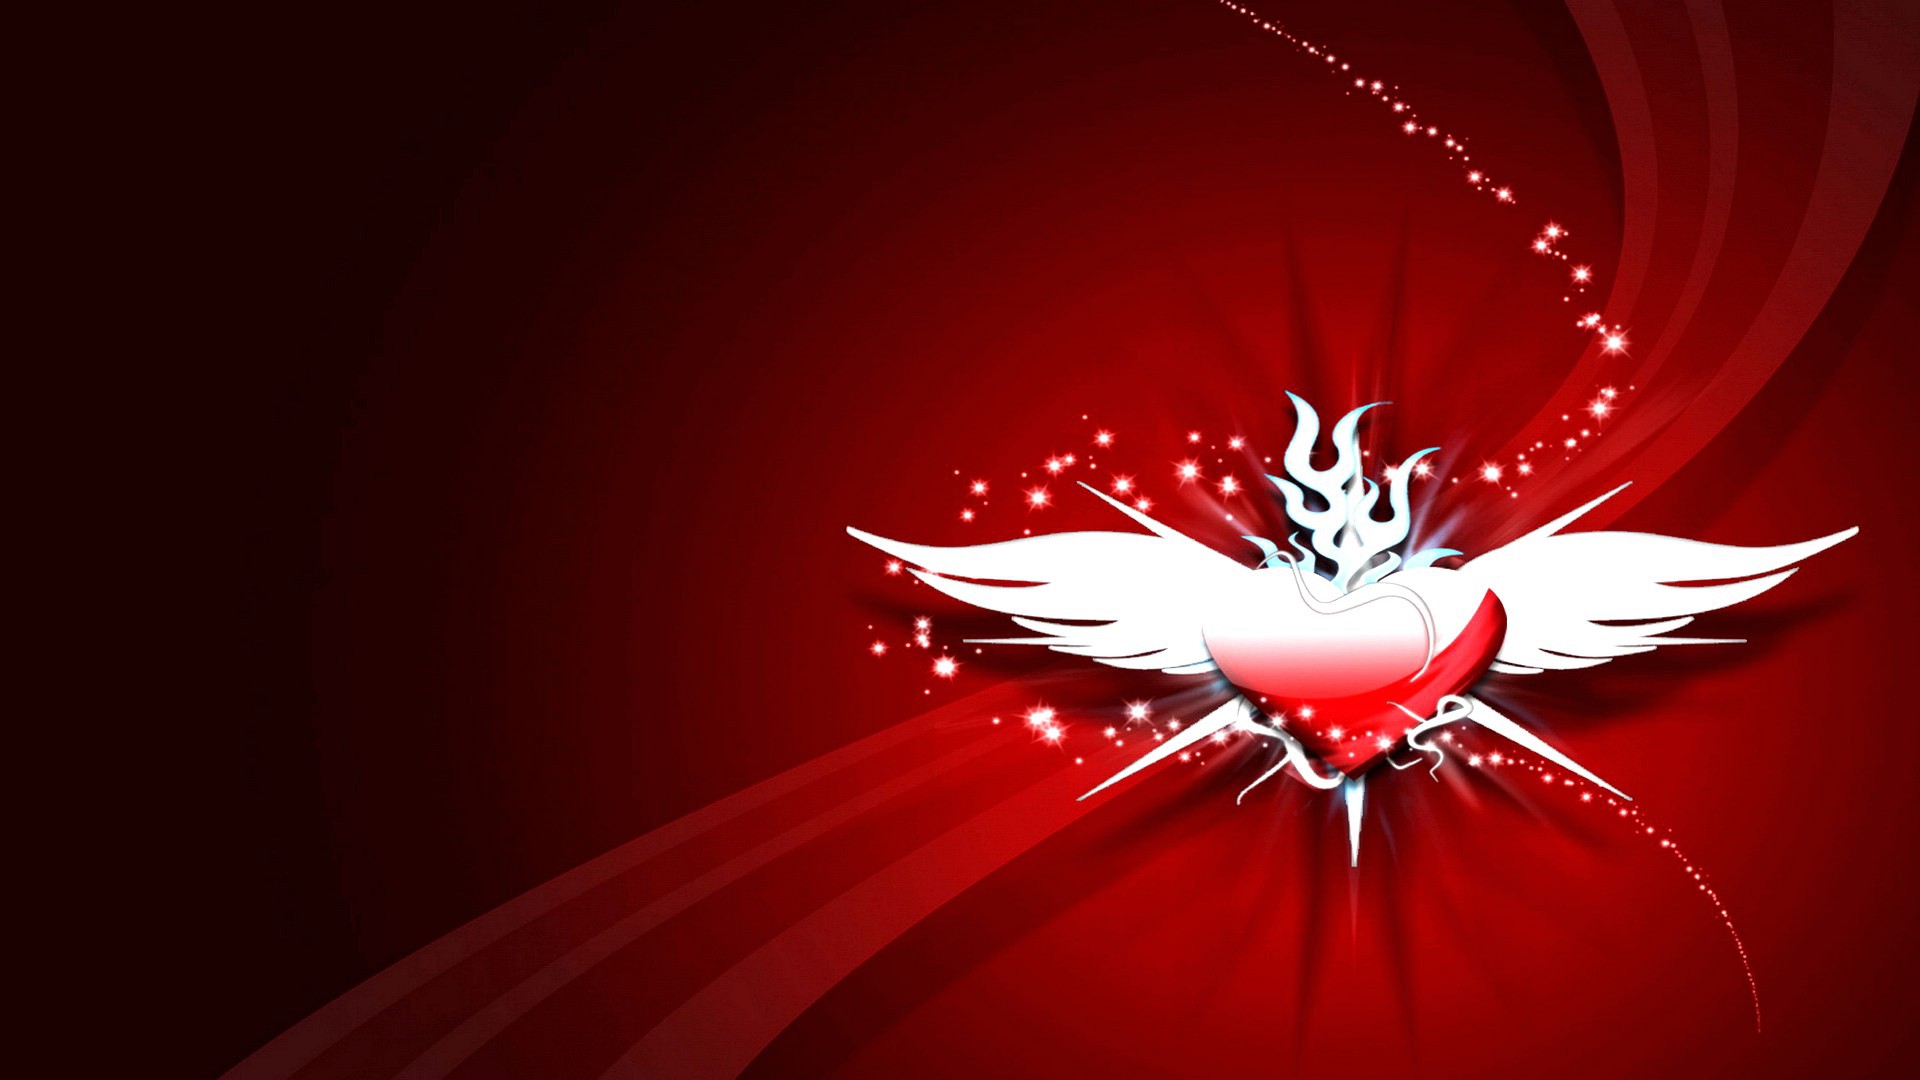 Heart With Wings On A Red Background Wallpaper And Image